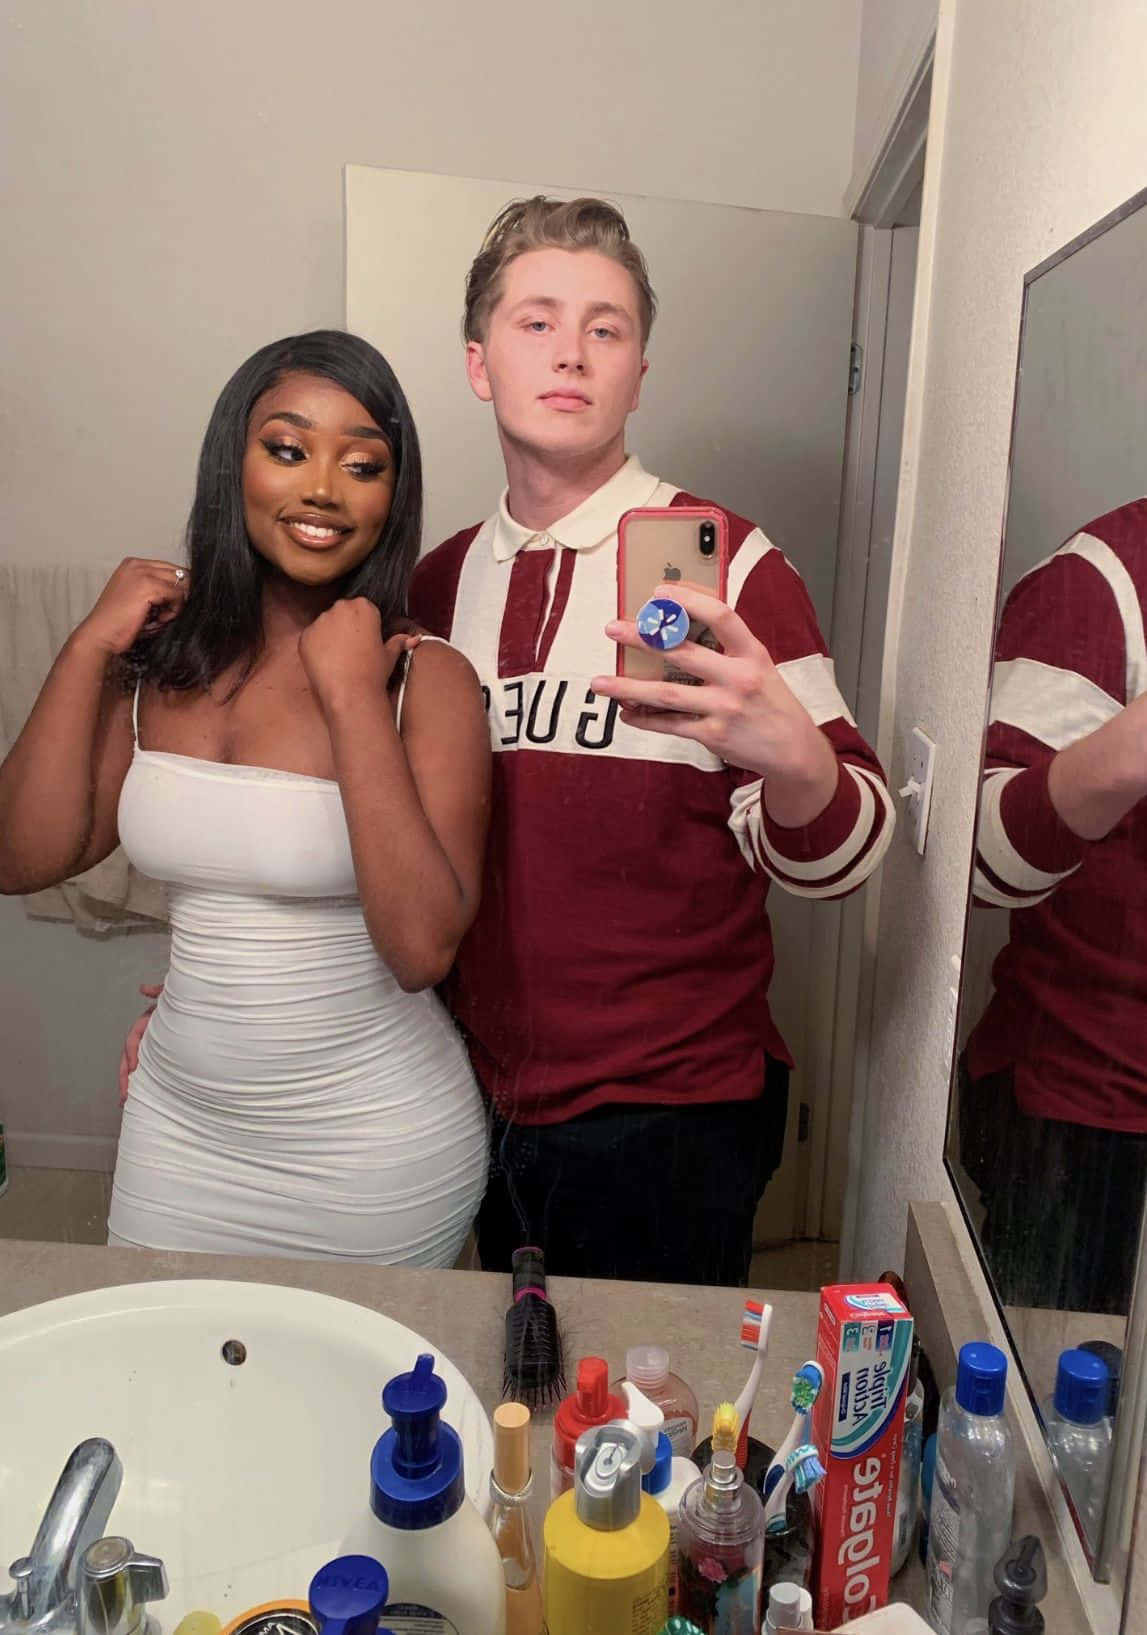 A Man And Woman Taking A Selfie In A Bathroom